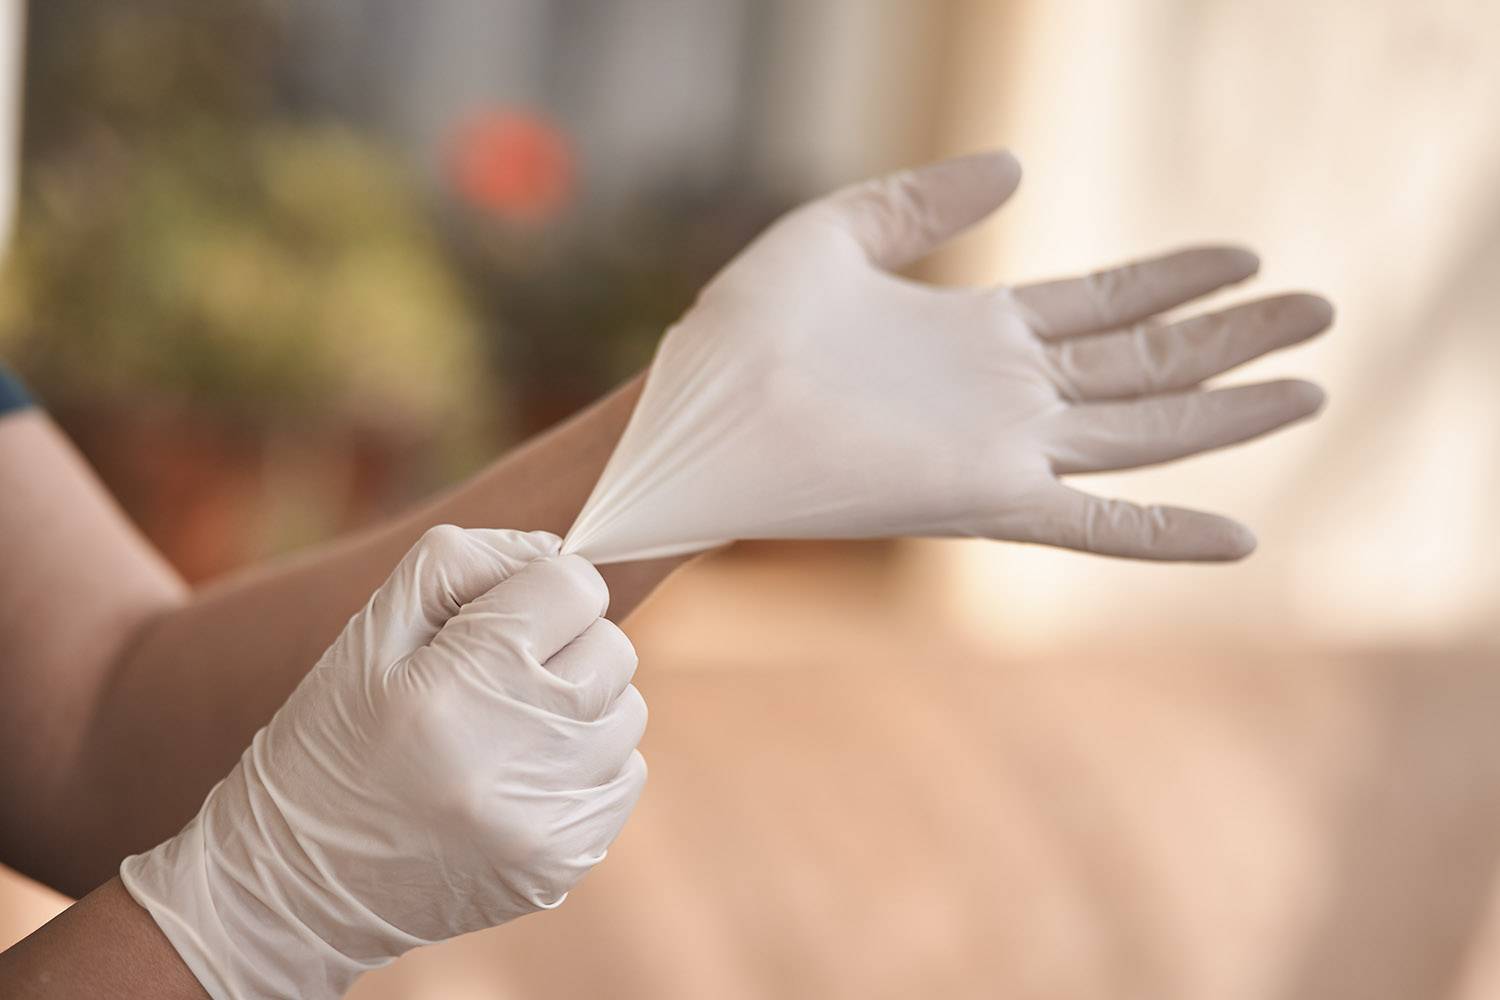 Control Infection and Cross Contamination with High Quality Vinyl Stretch Vinyl and Nitrile Gloves